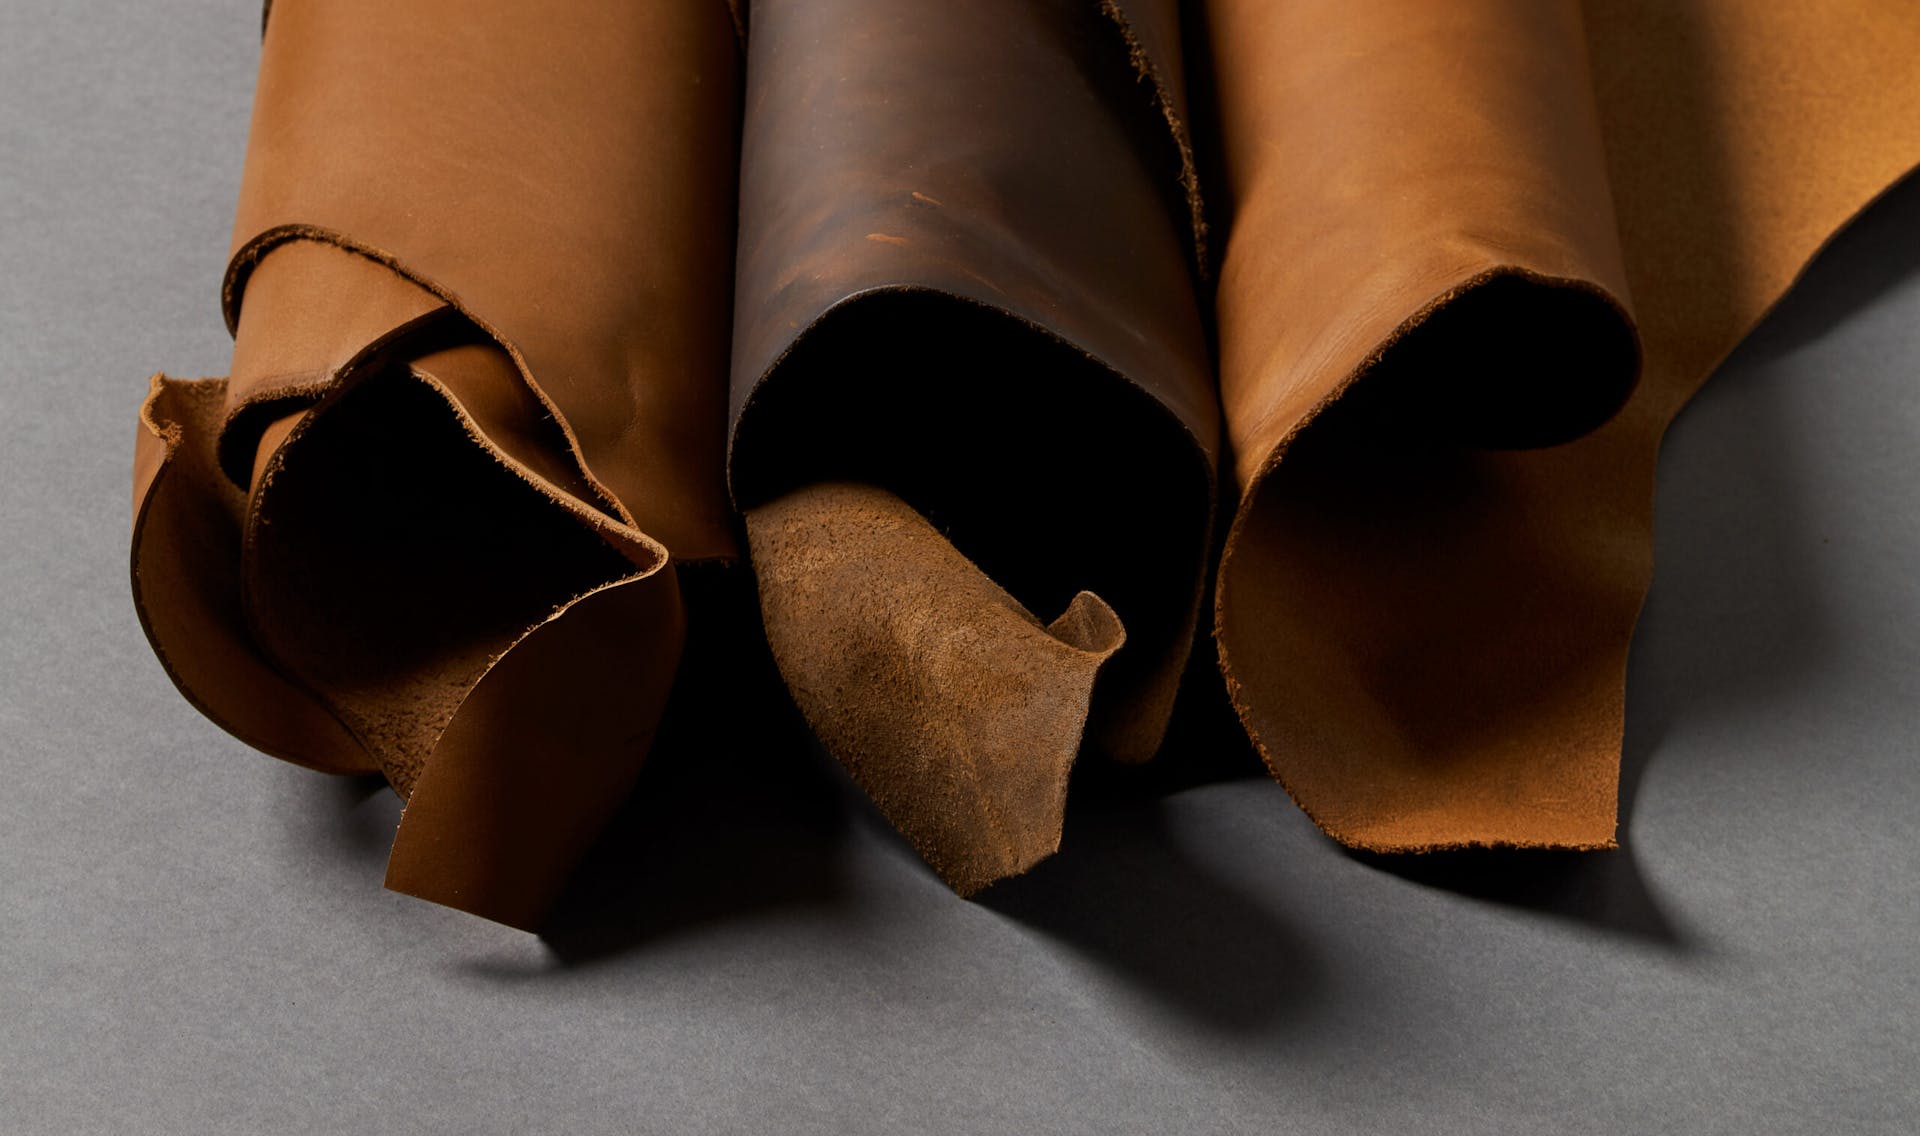 The Five Types of Leather: Styles, Tanning, and Care Tips - Our